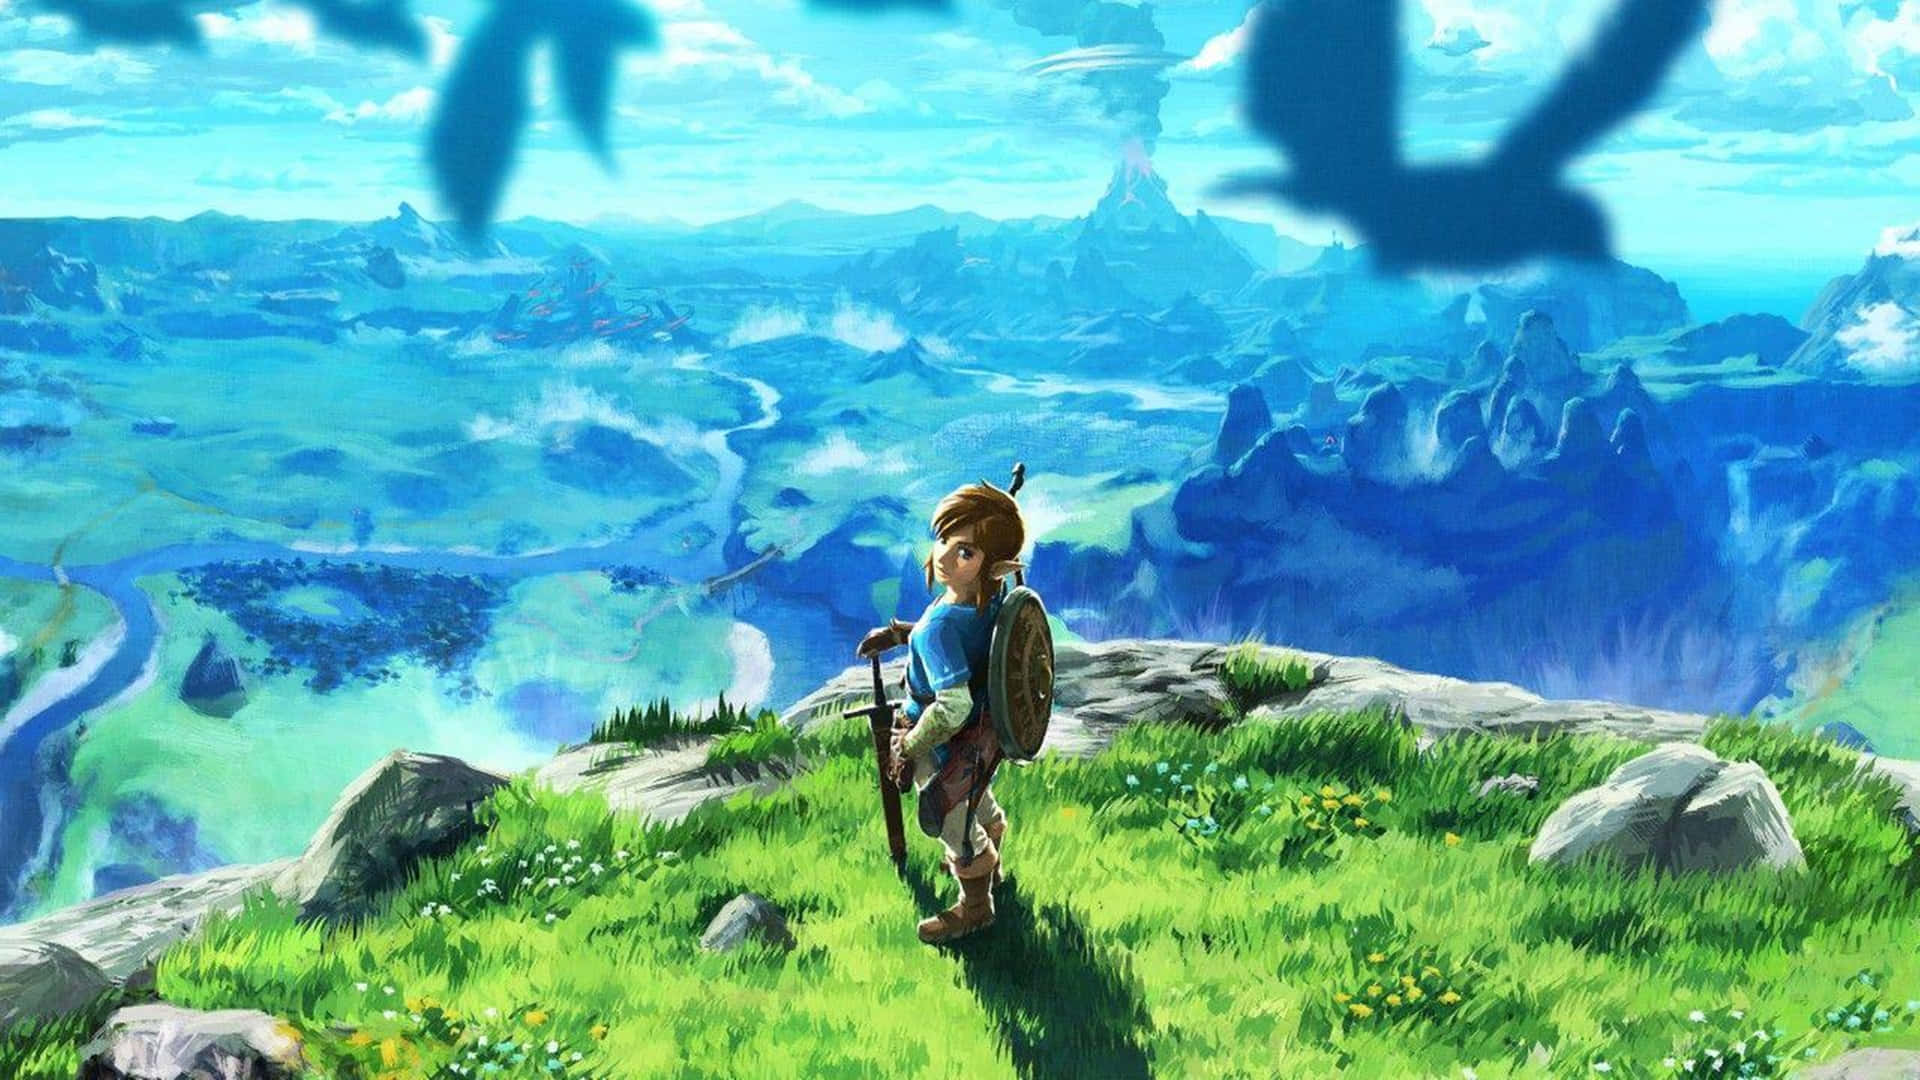 Explore the Wilds of Hyrule in the Spectacular Zelda Breath of the Wild Wallpaper